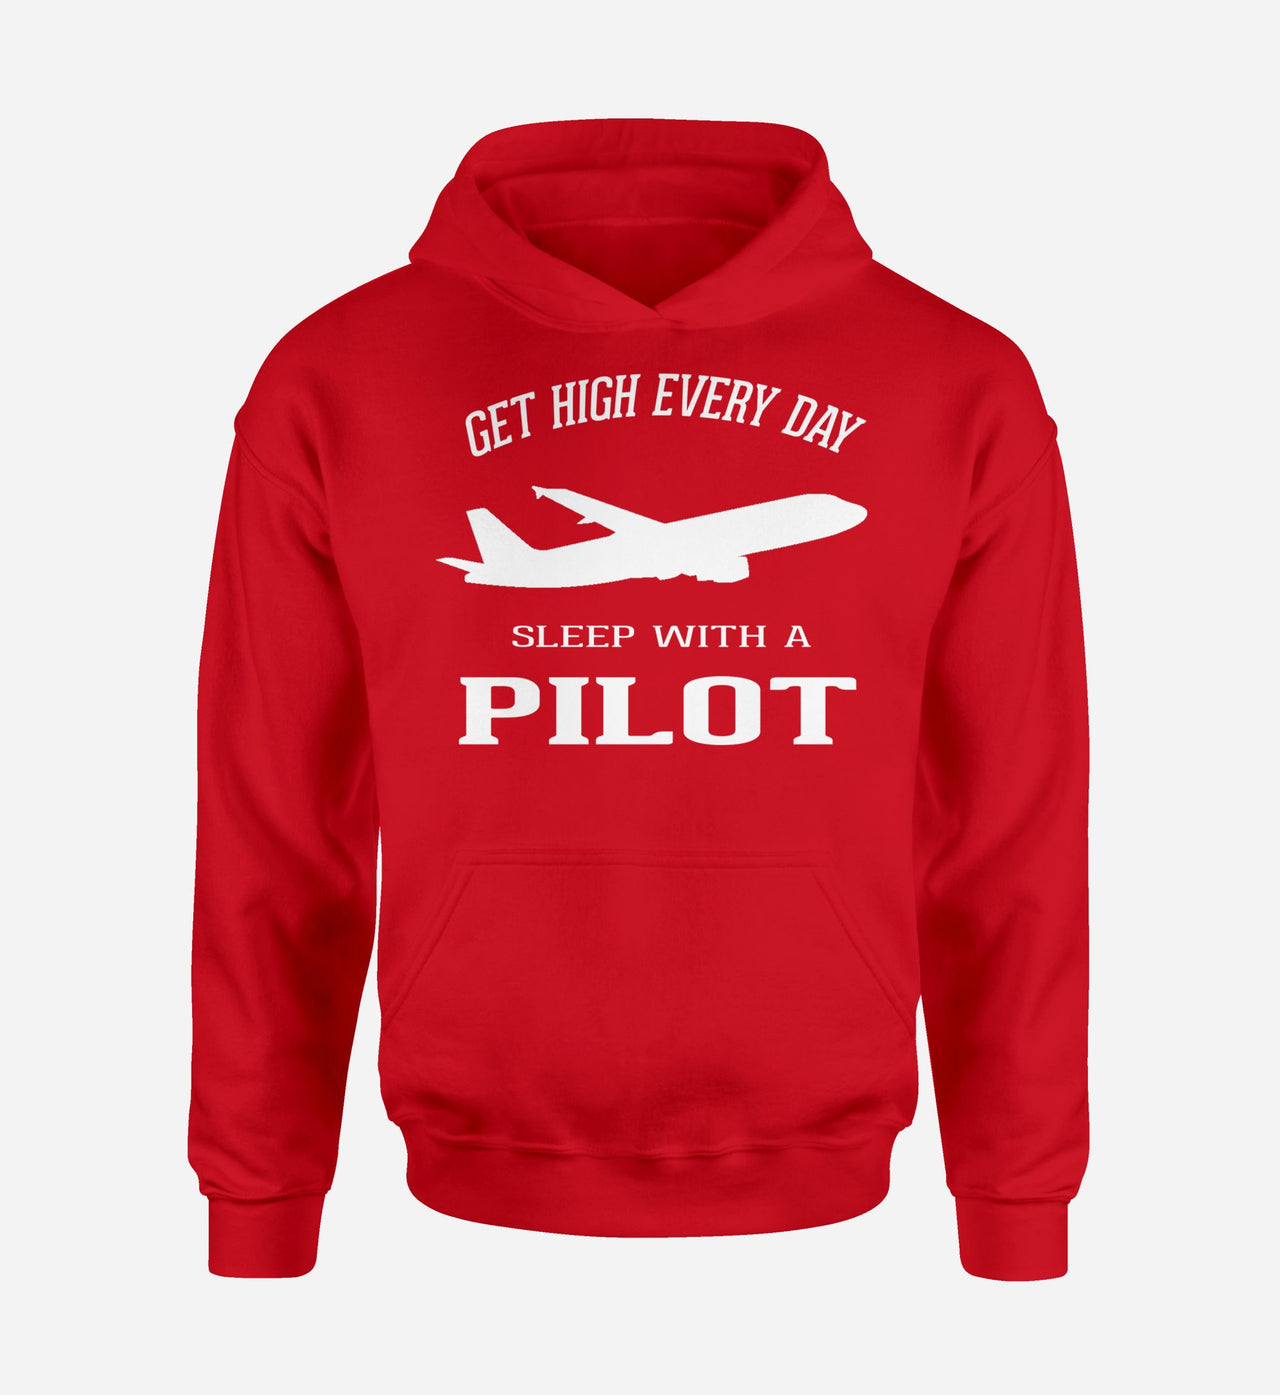 Get High Every Day Sleep With A Pilot Designed Hoodies